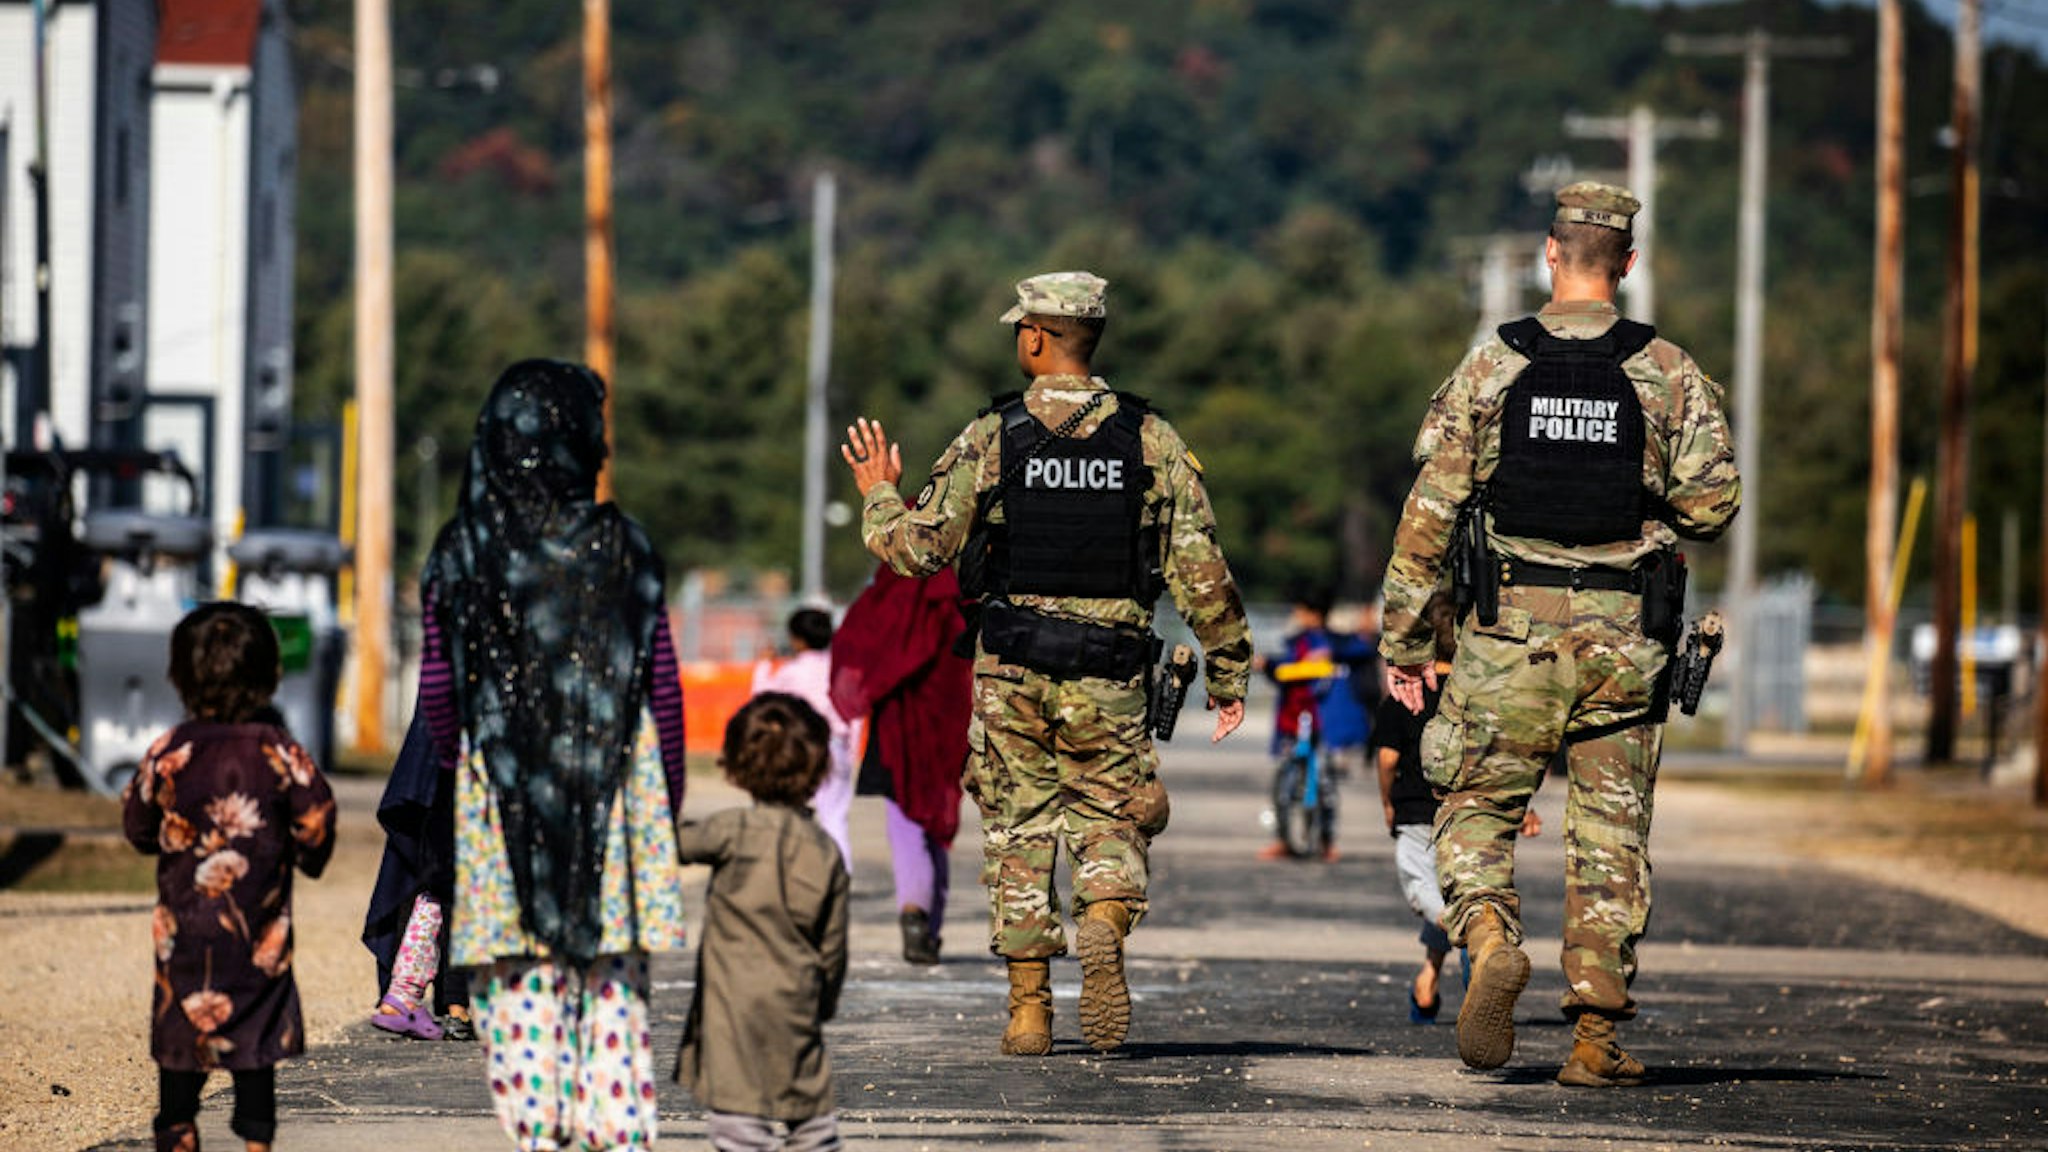 FORT MCCOY, WI - SEPTEMBER 30: U.S. Military Police walk past Afghan refugees at the Village at the Ft. McCoy U.S. Army base on September 30, 2021 in Ft. McCoy, Wisconsin. The Village is the community housing for the Afghans, comprised of eight neighborhoods where the evacuees live, eat, and receive services and support. There are approximately 12,600 Afghan refugees being cared for at the base under Operation Allies Welcome. The Department of Defense, through U.S. Northern Command and U.S. Army North, and in support of the Department of Homeland Security, is providing transportation, temporary housing, medical screening and general support for at least 50,000 Afghan evacuees at suitable facilities in permanent or temporary structures while the Afghans complete the processing necessary to resettle in the United States.